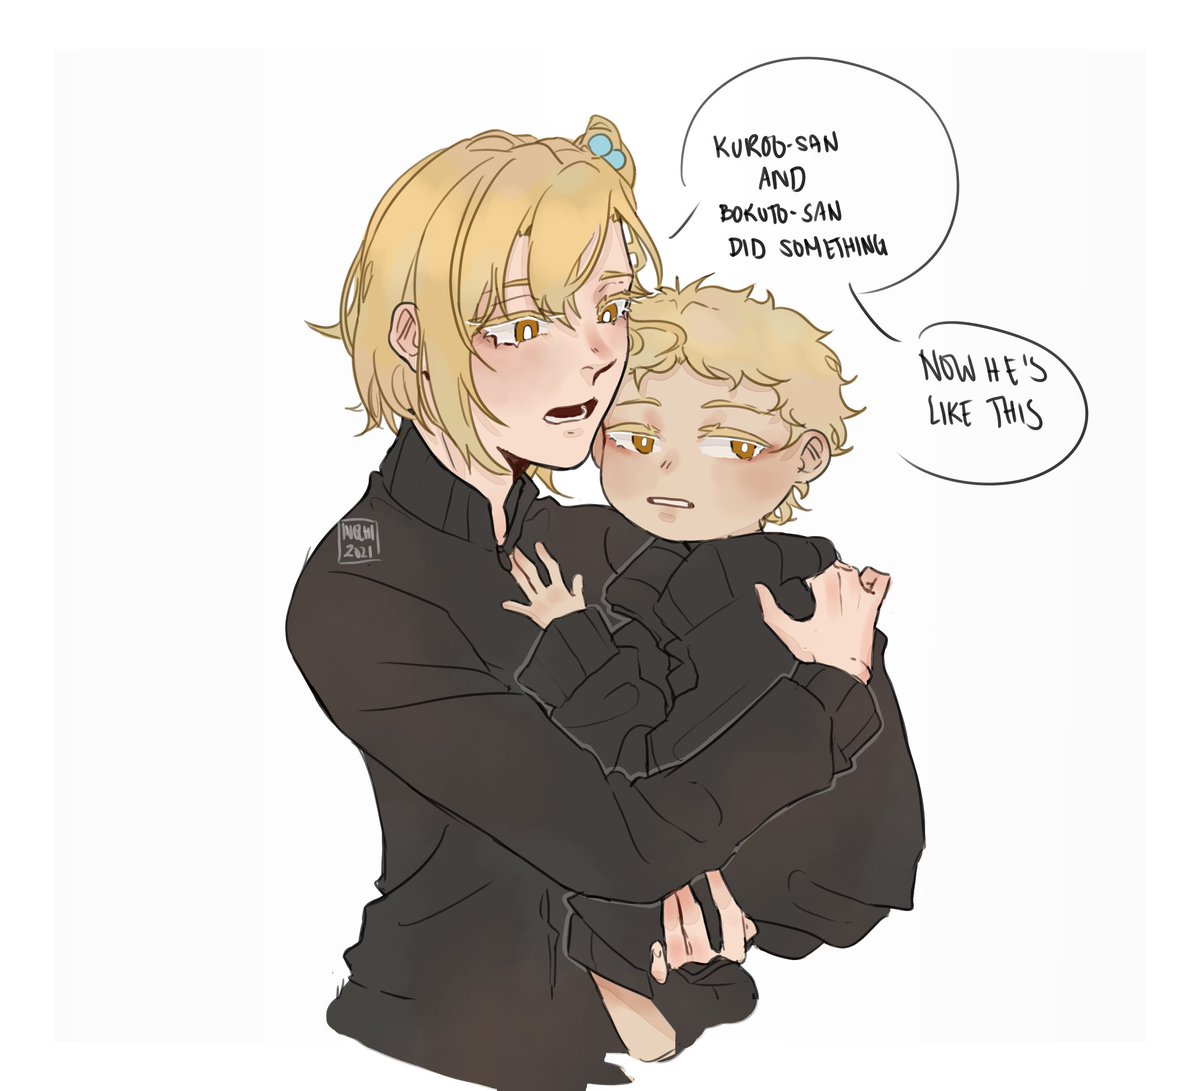 #Haikyuu : Adventures of Babysitting

a small series of events where tsukki turns into a child along with some friends

1/? , when something goes wrong, always blame that pesky cat and owl 